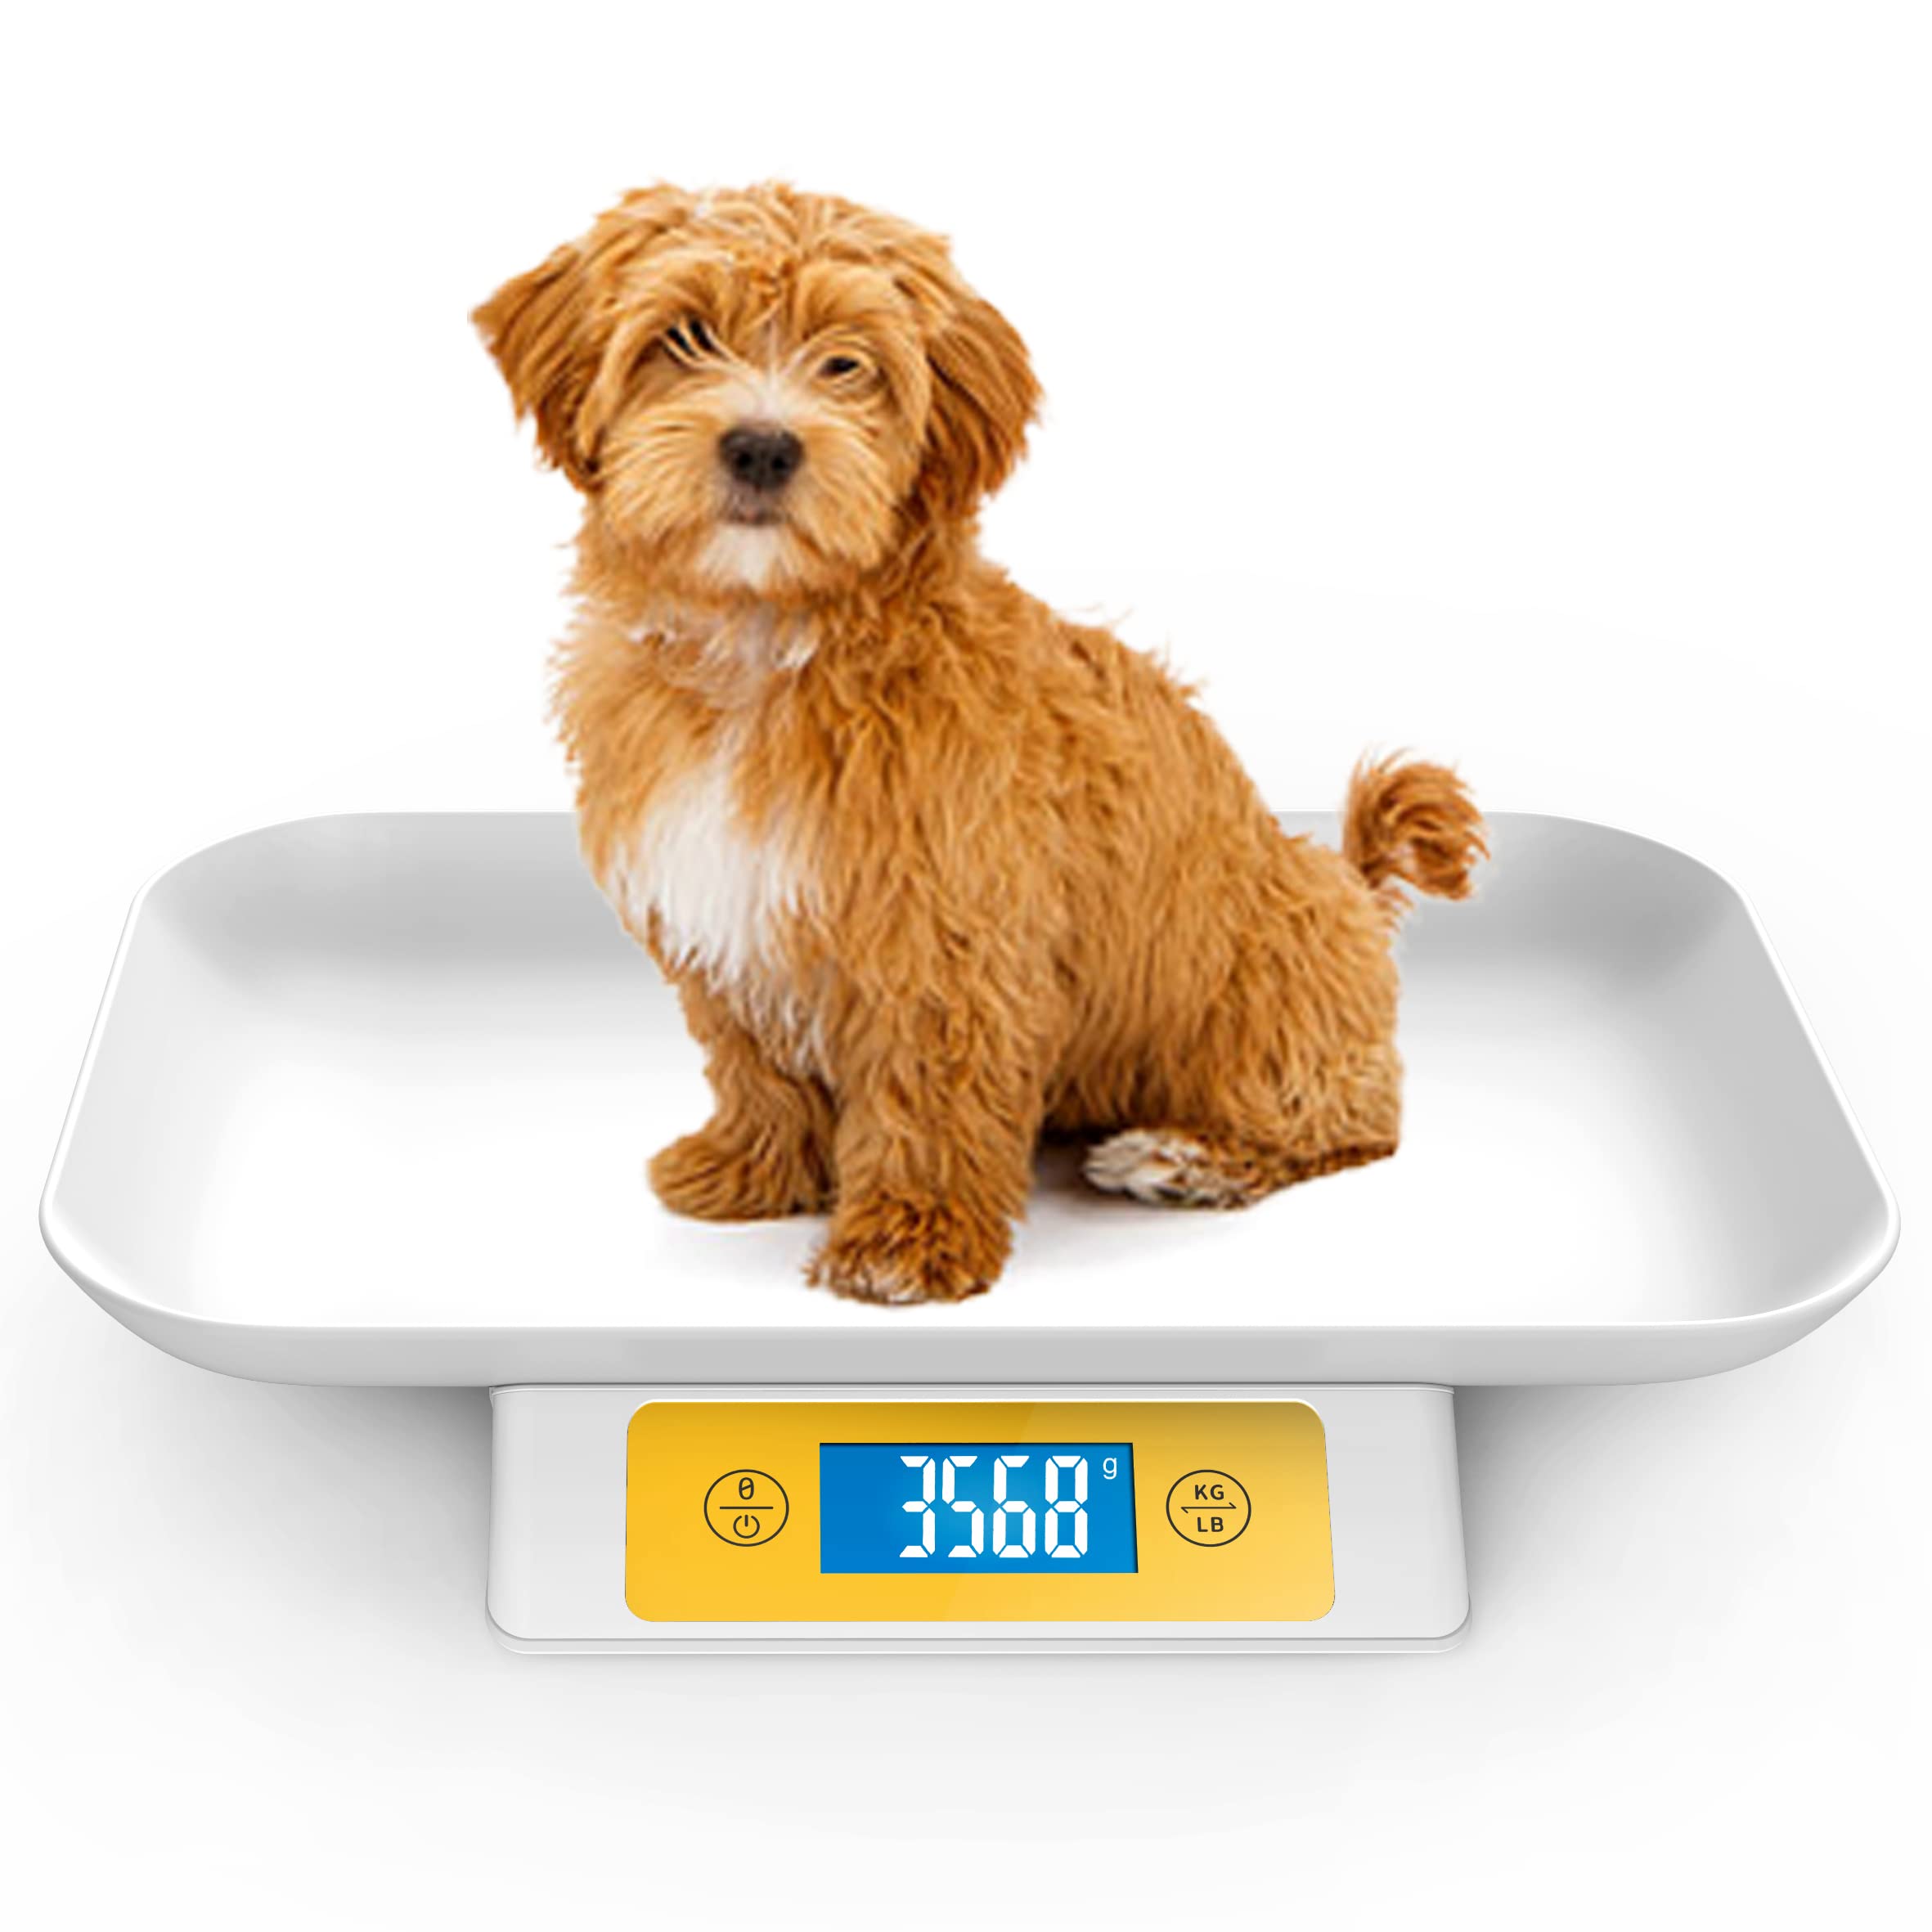 Electronic LCD Digital Display Pet Scales Weight Scales Management